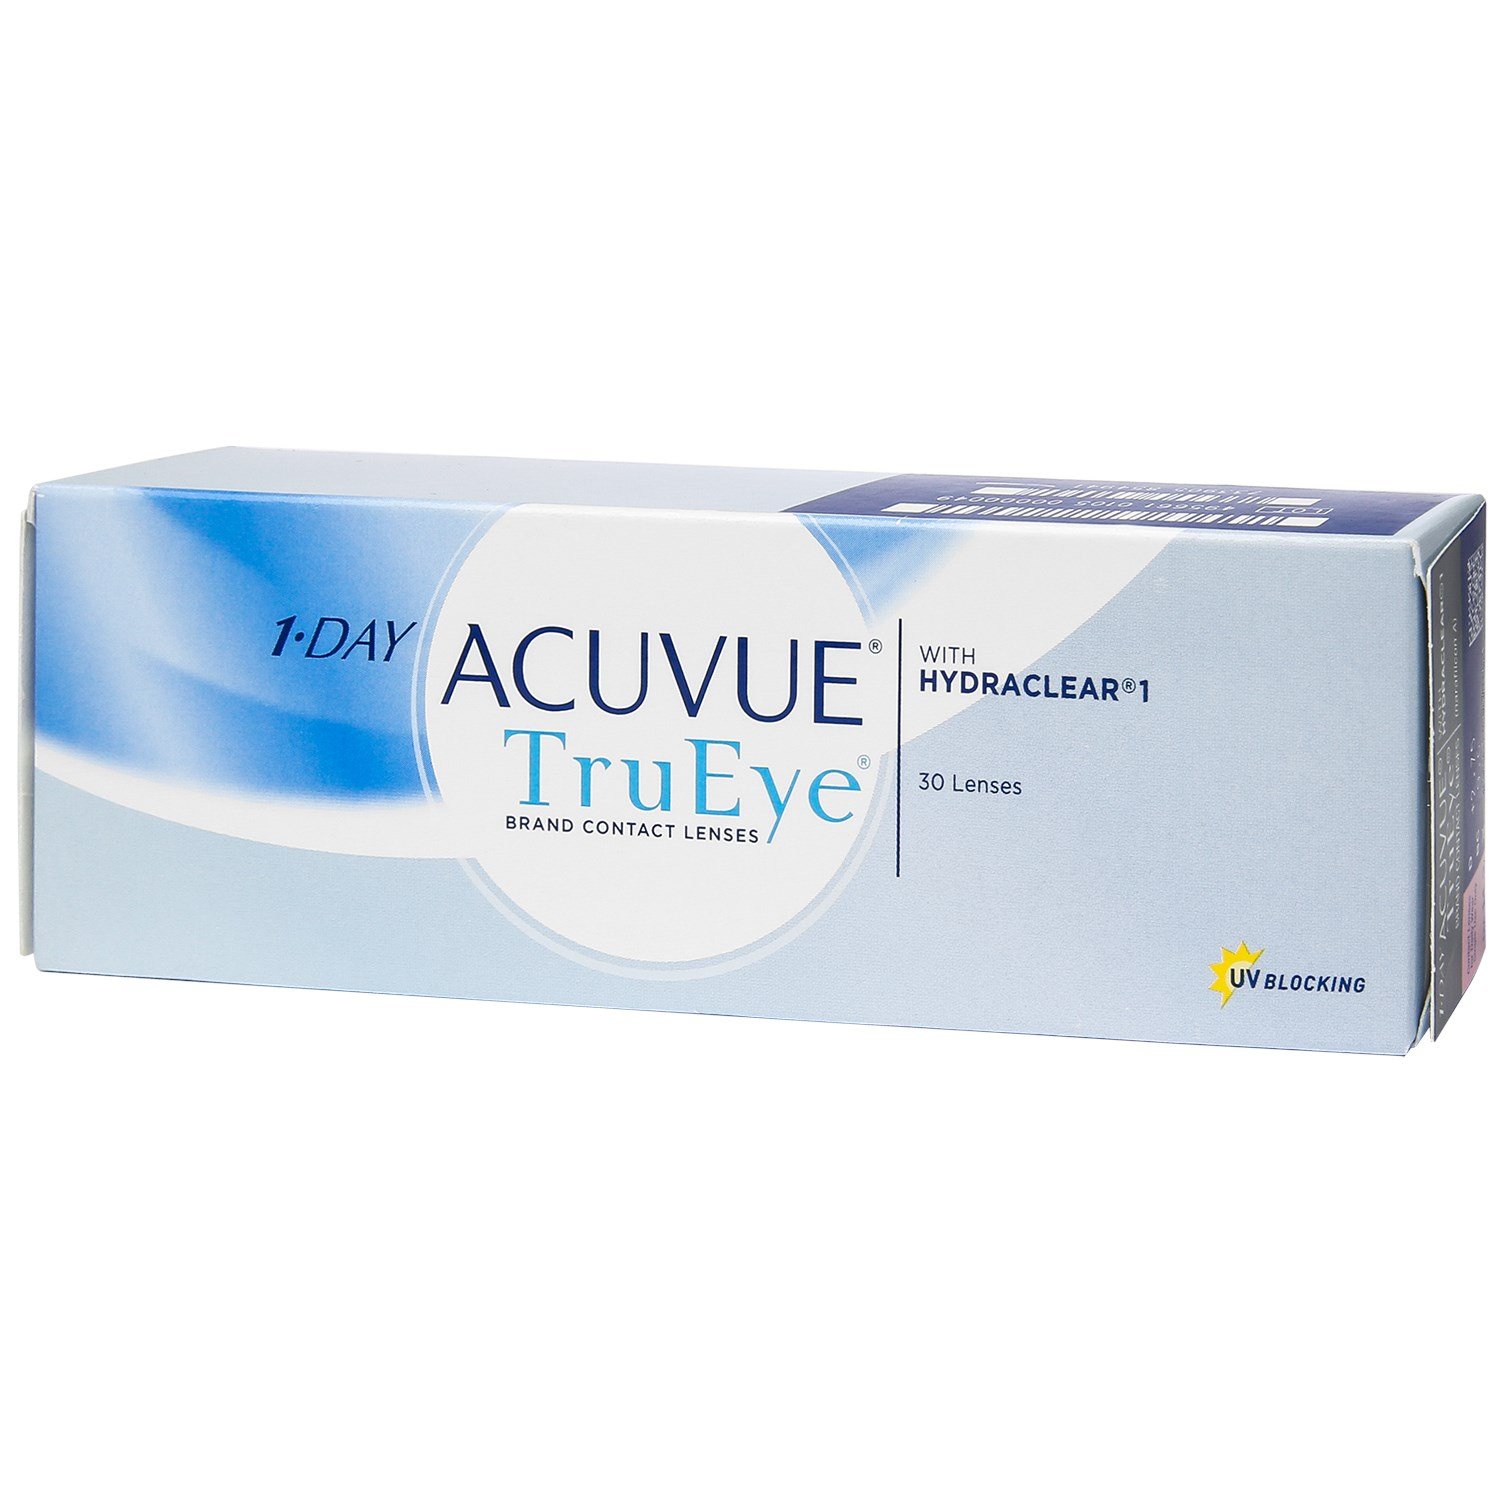 Reviews for ACUVUE